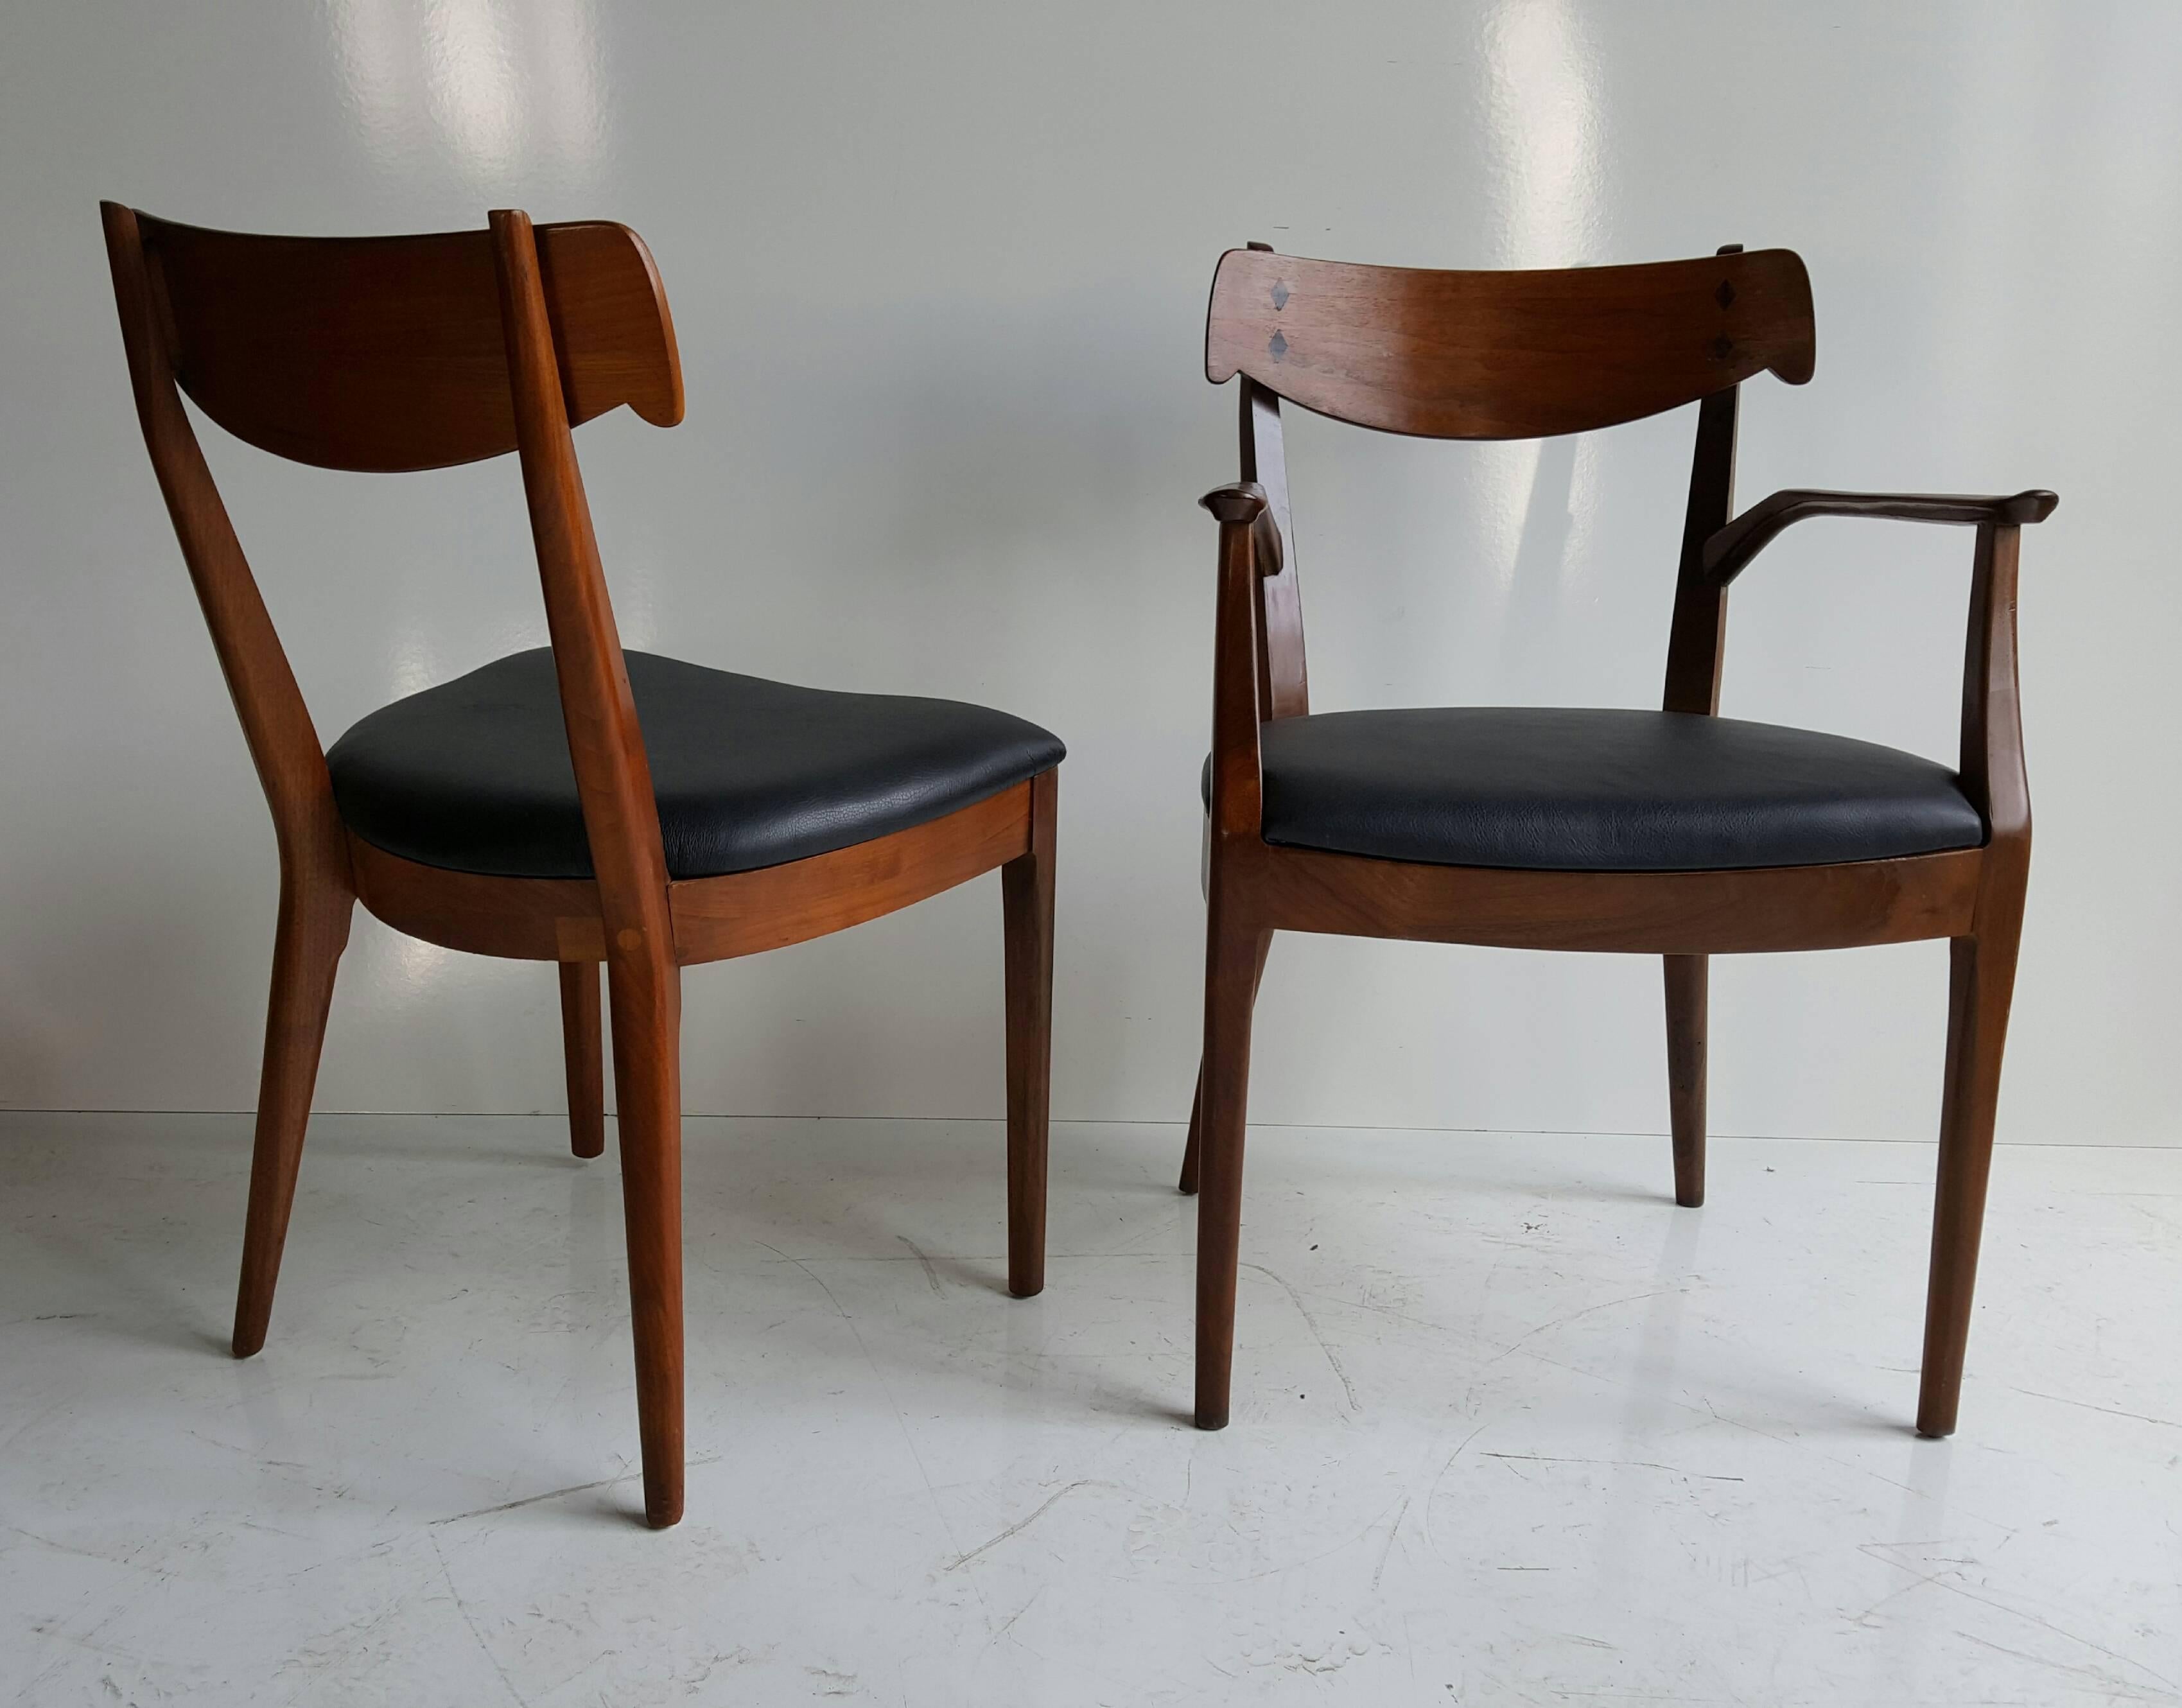 Finely sculpted set of ten walnut and rosewood inlaid dining chairs designed by Kipp Stewart and Stuart MacDougall for Drexel, circa 1950. Six newly upholstered in leather, four side chairs retain original Naugahyde.